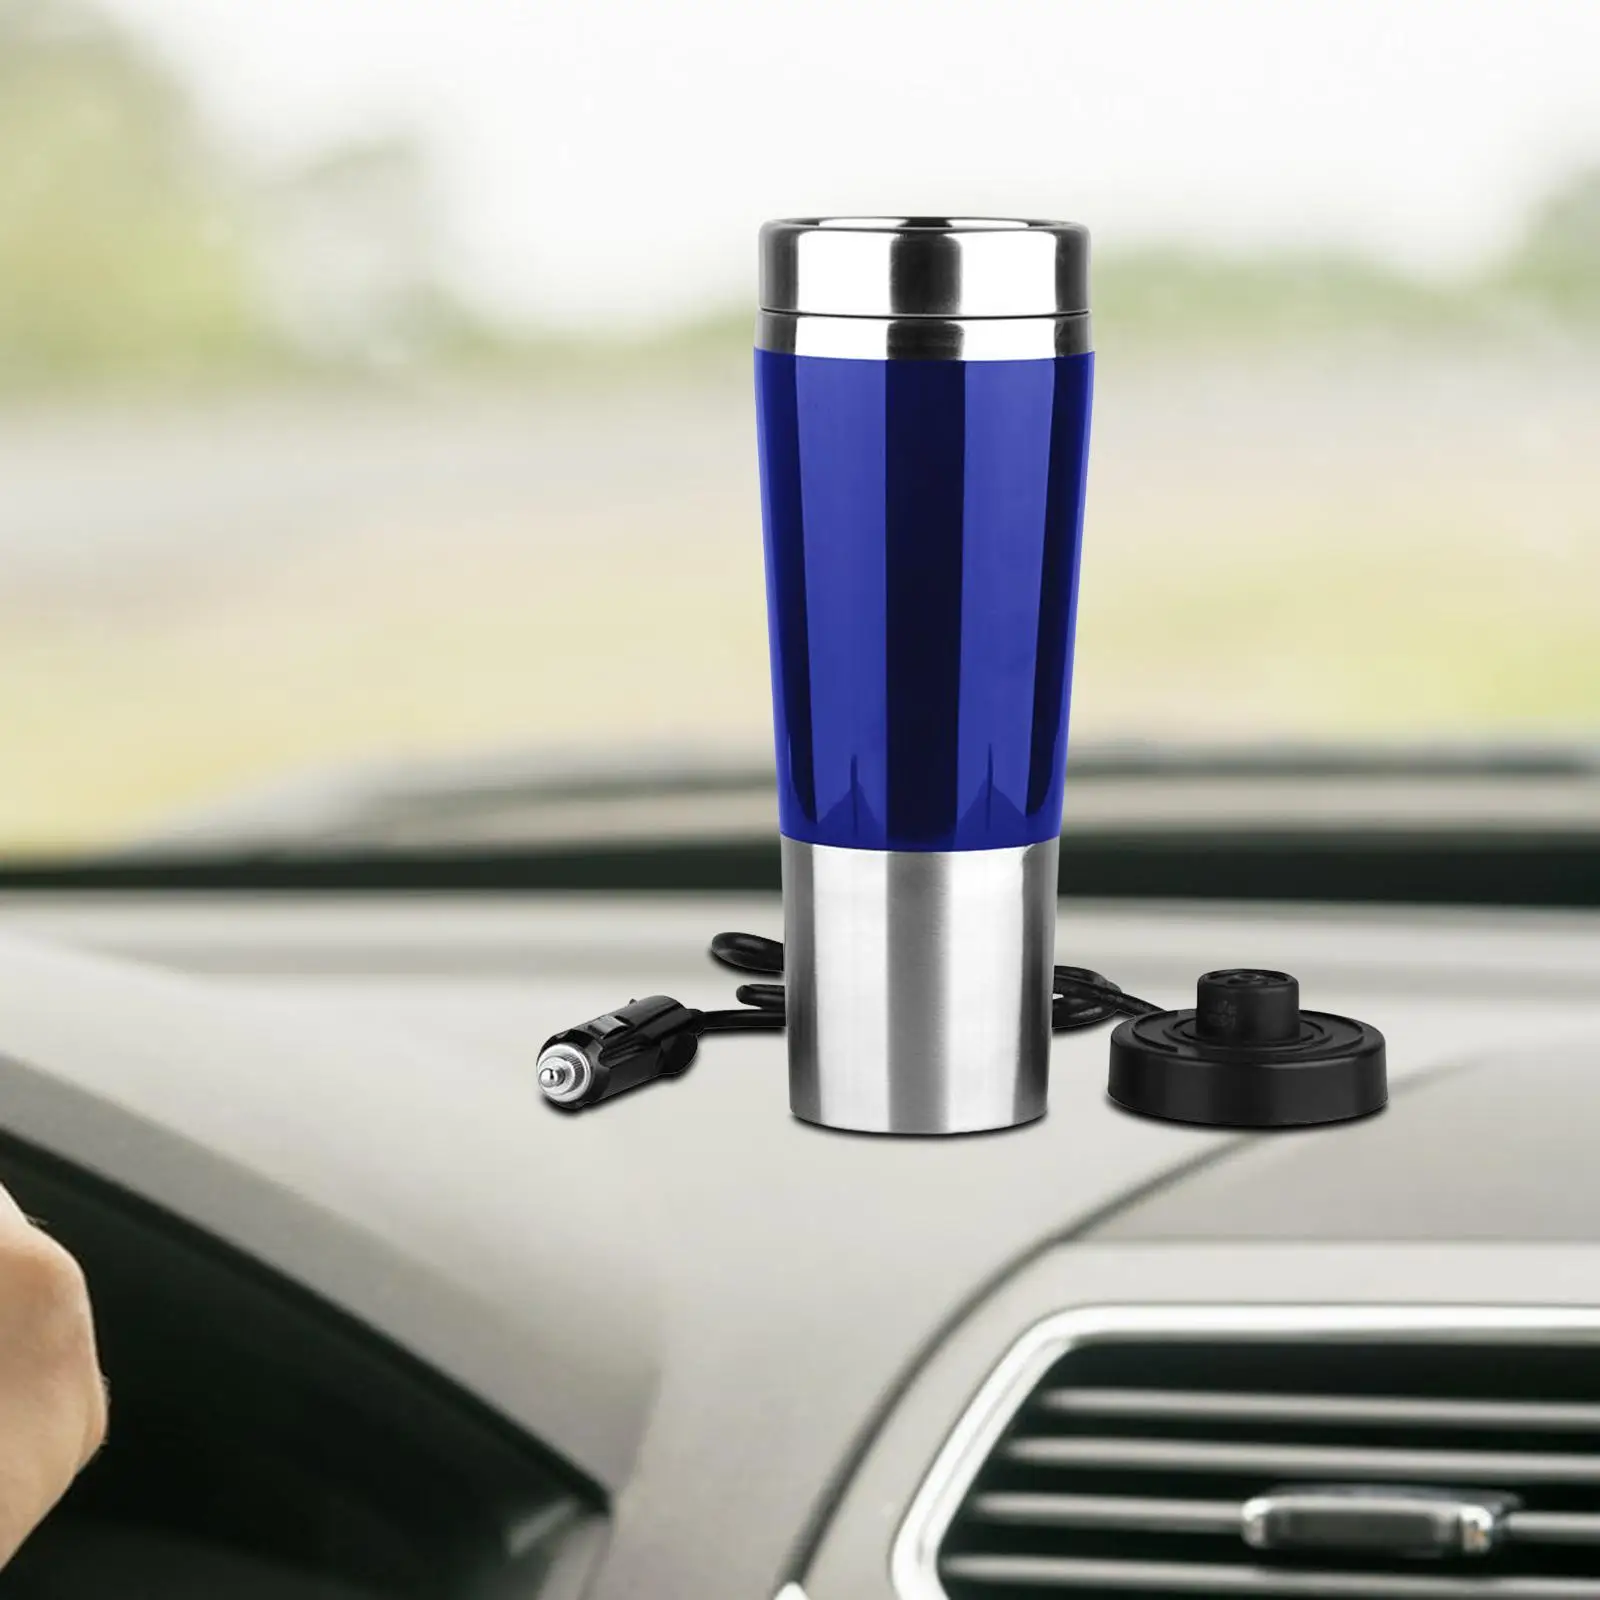 Portable 12V Car Kettle Boiler Stainless Steel Heating Warmer 450ml Insulated Cup for Tea Milk Water Travel Camping